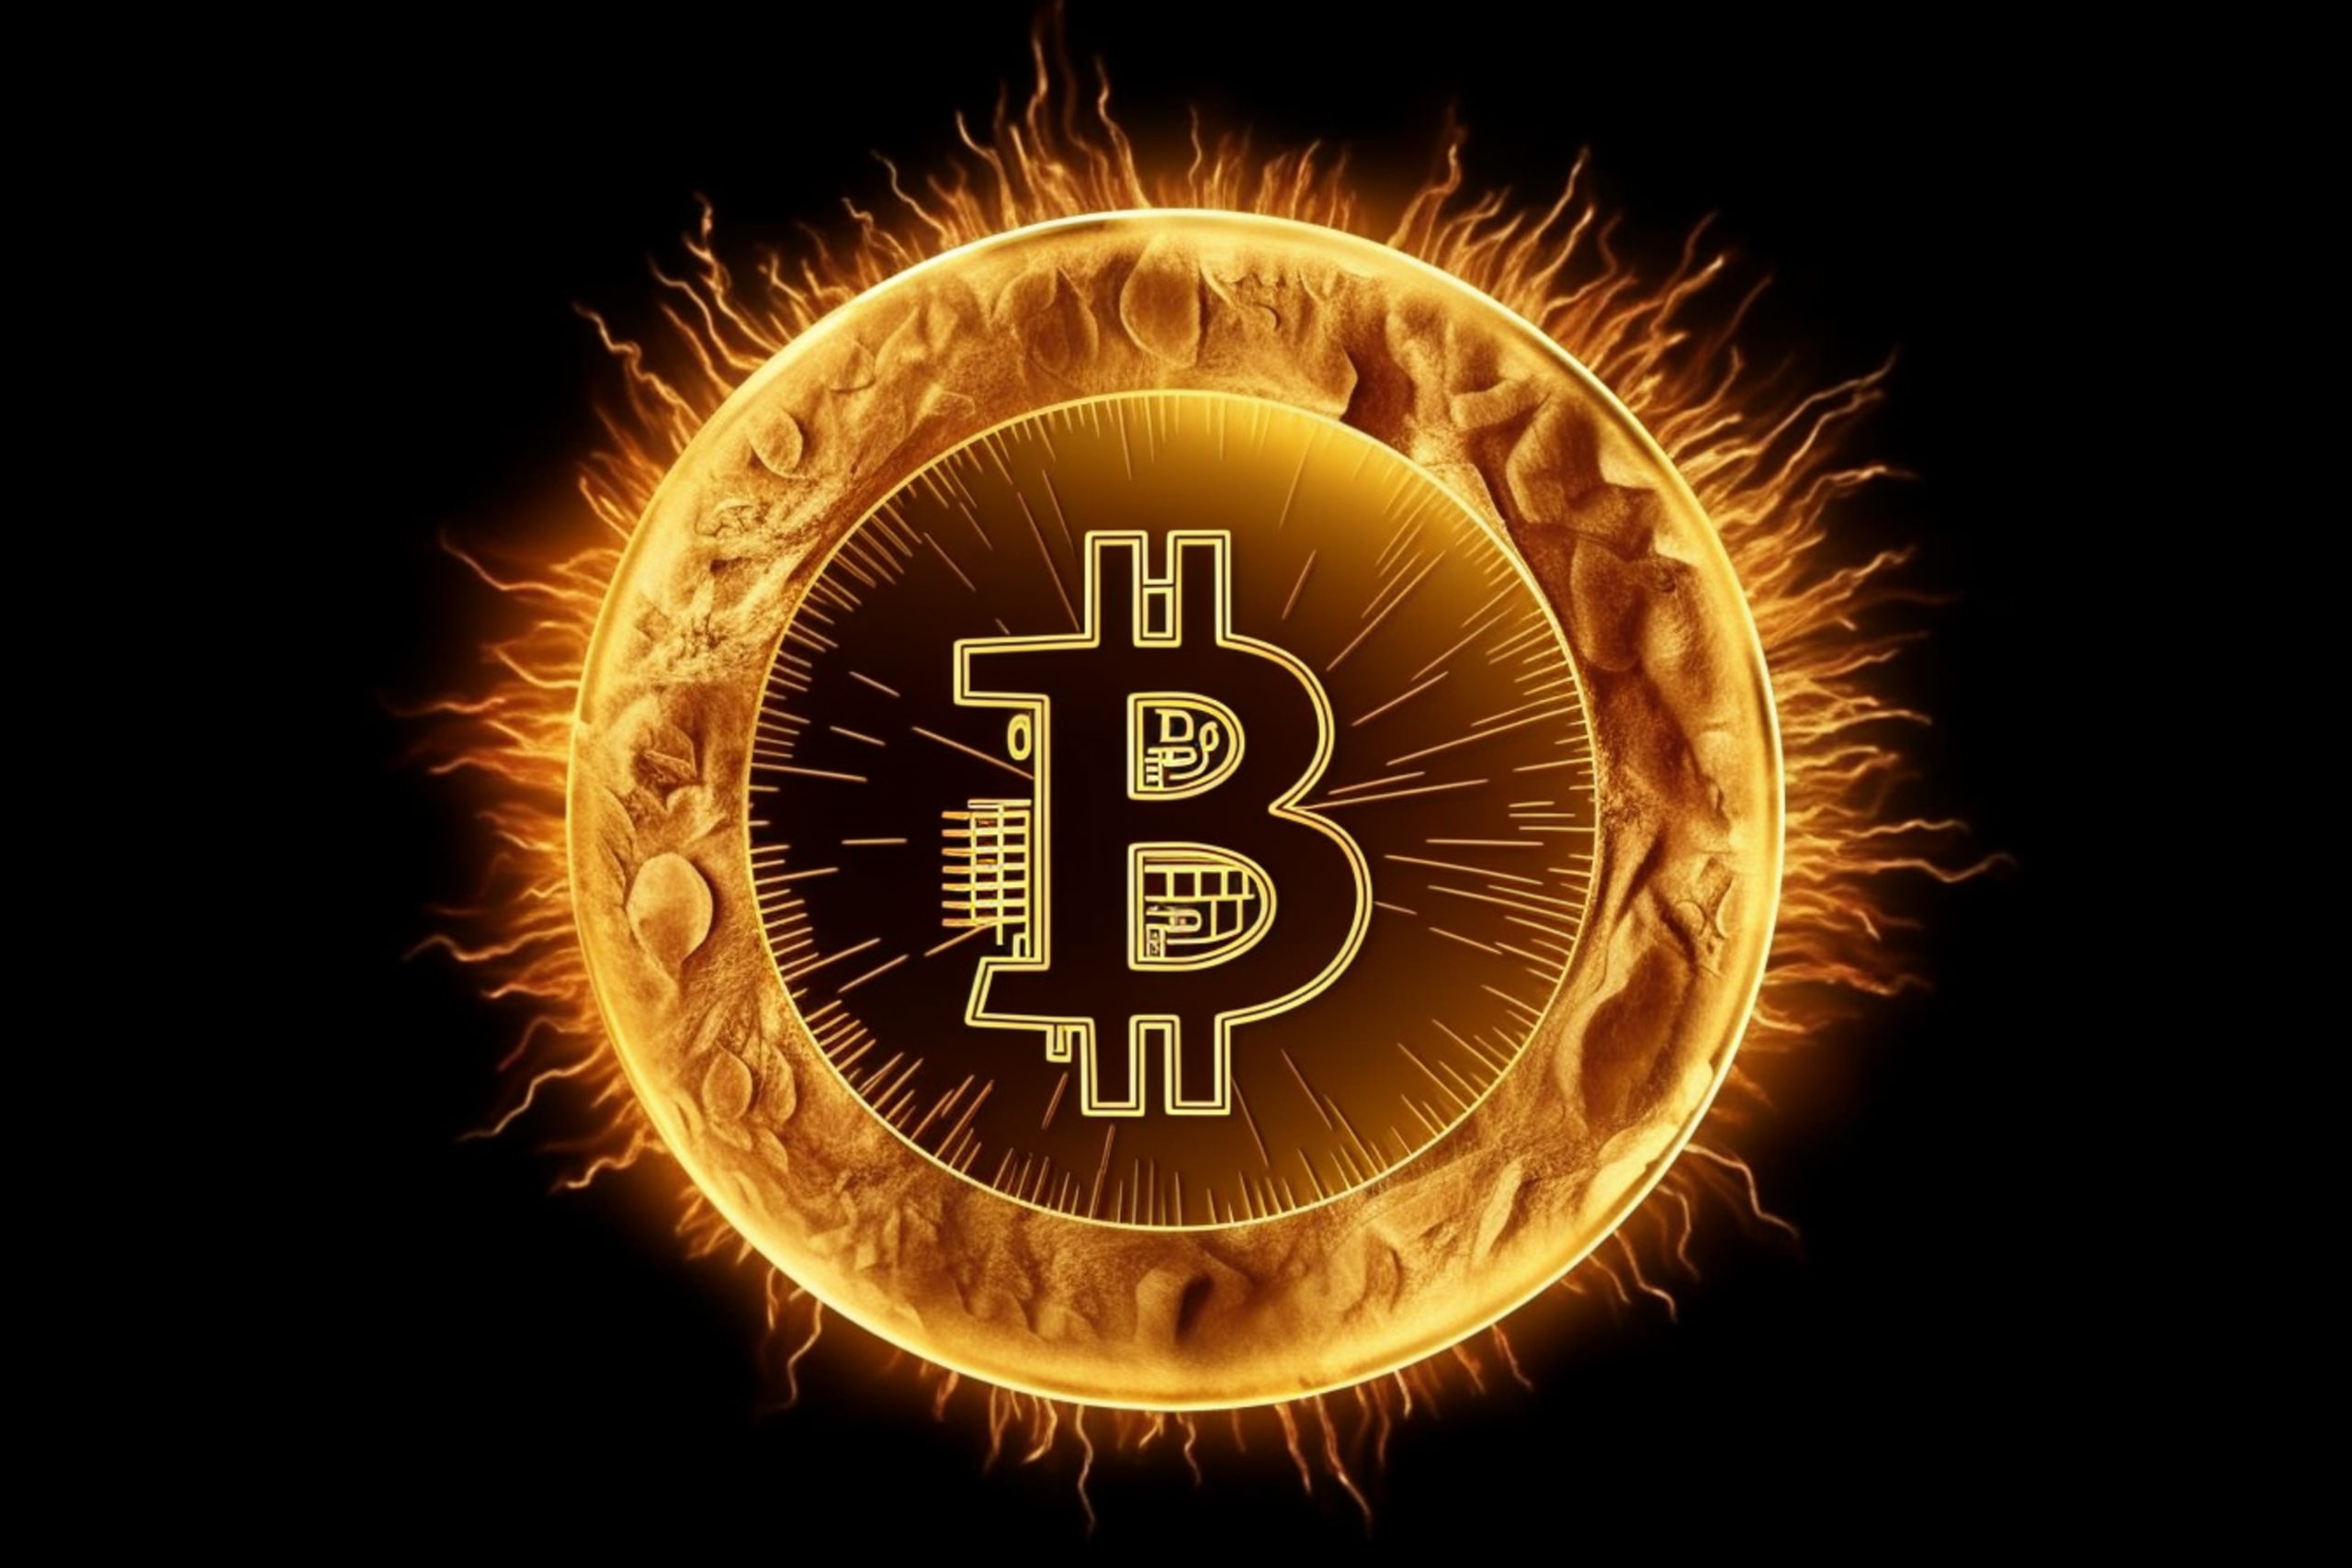 gold crypto currency coin bitcoin open fire